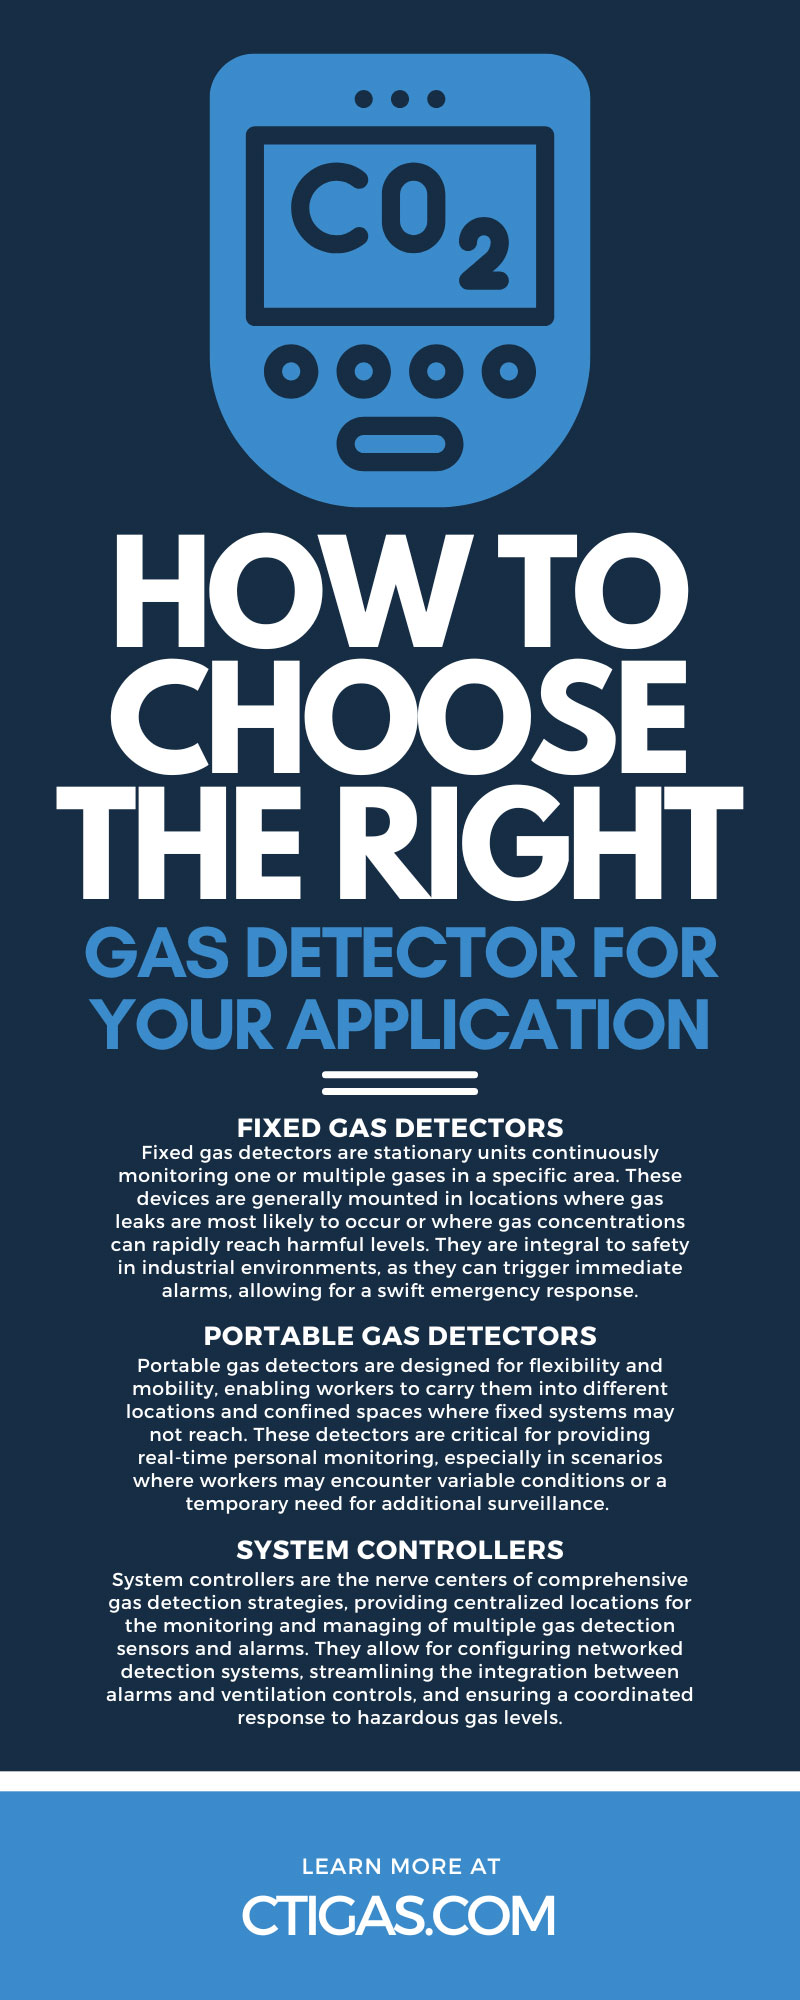 How To Choose the Right Gas Detector for Your Application
